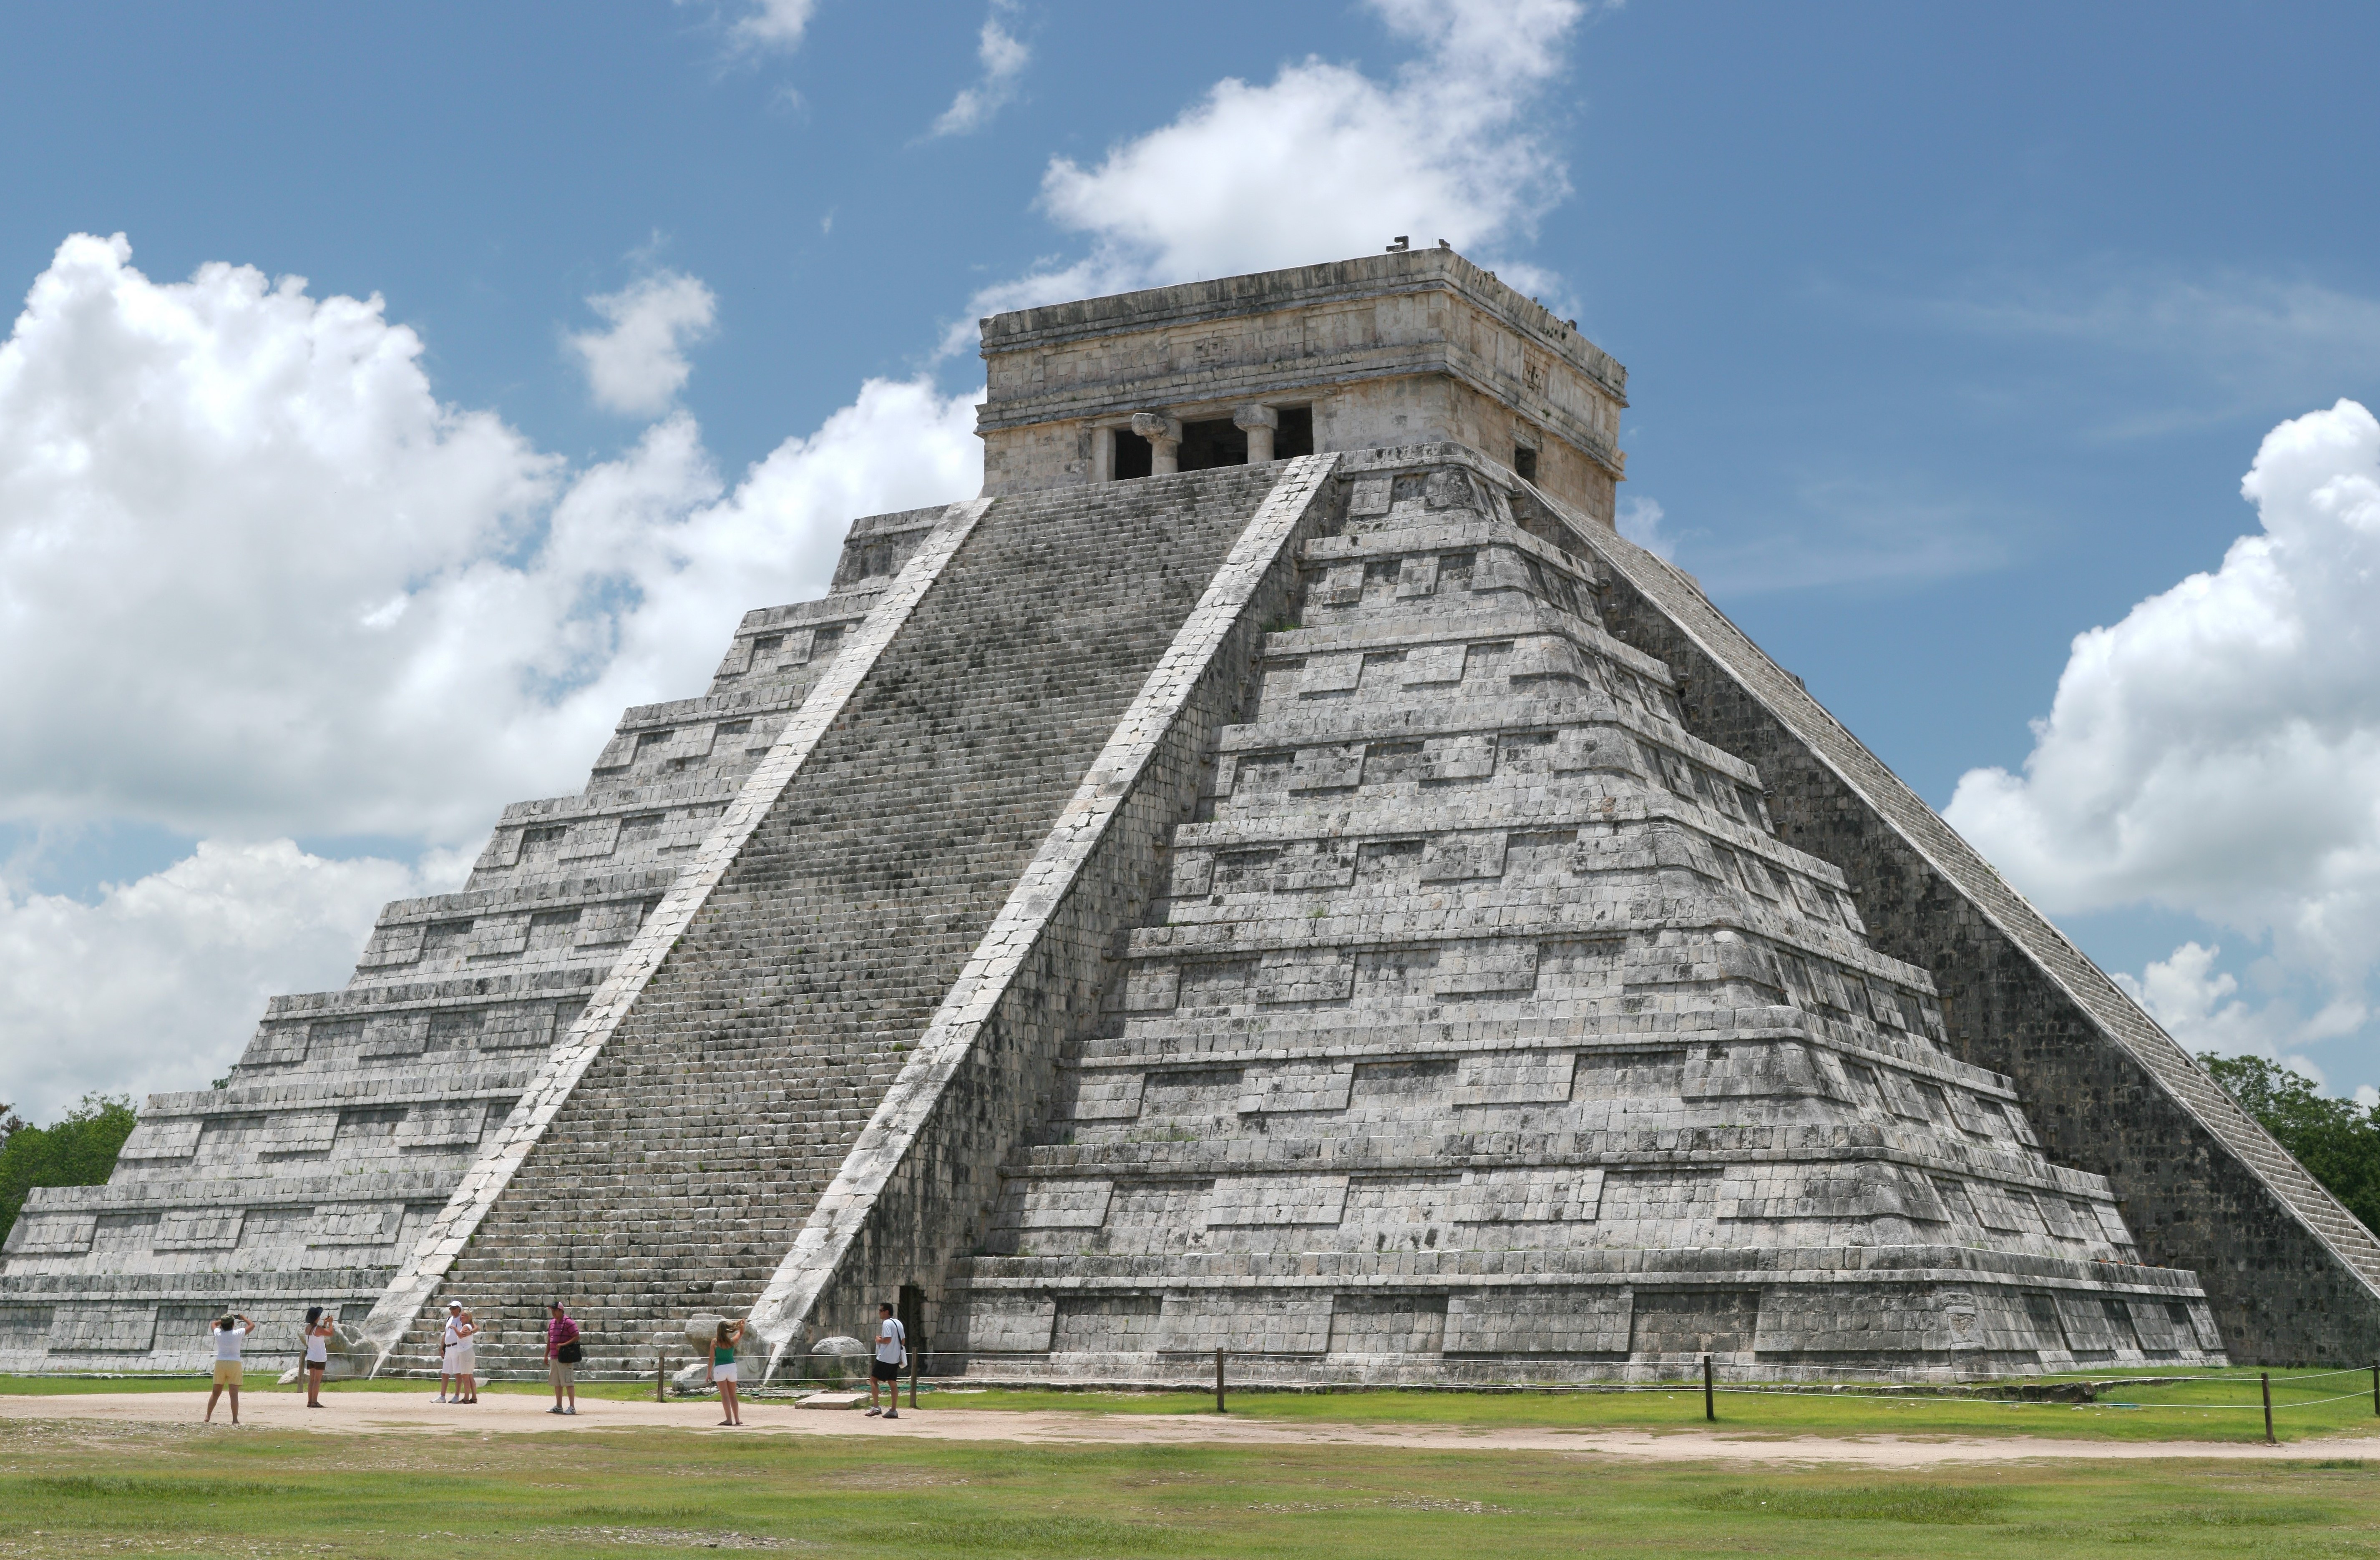 Explore The Ancient Mayan Culture With a Chichén Itzá Exclusive Tour